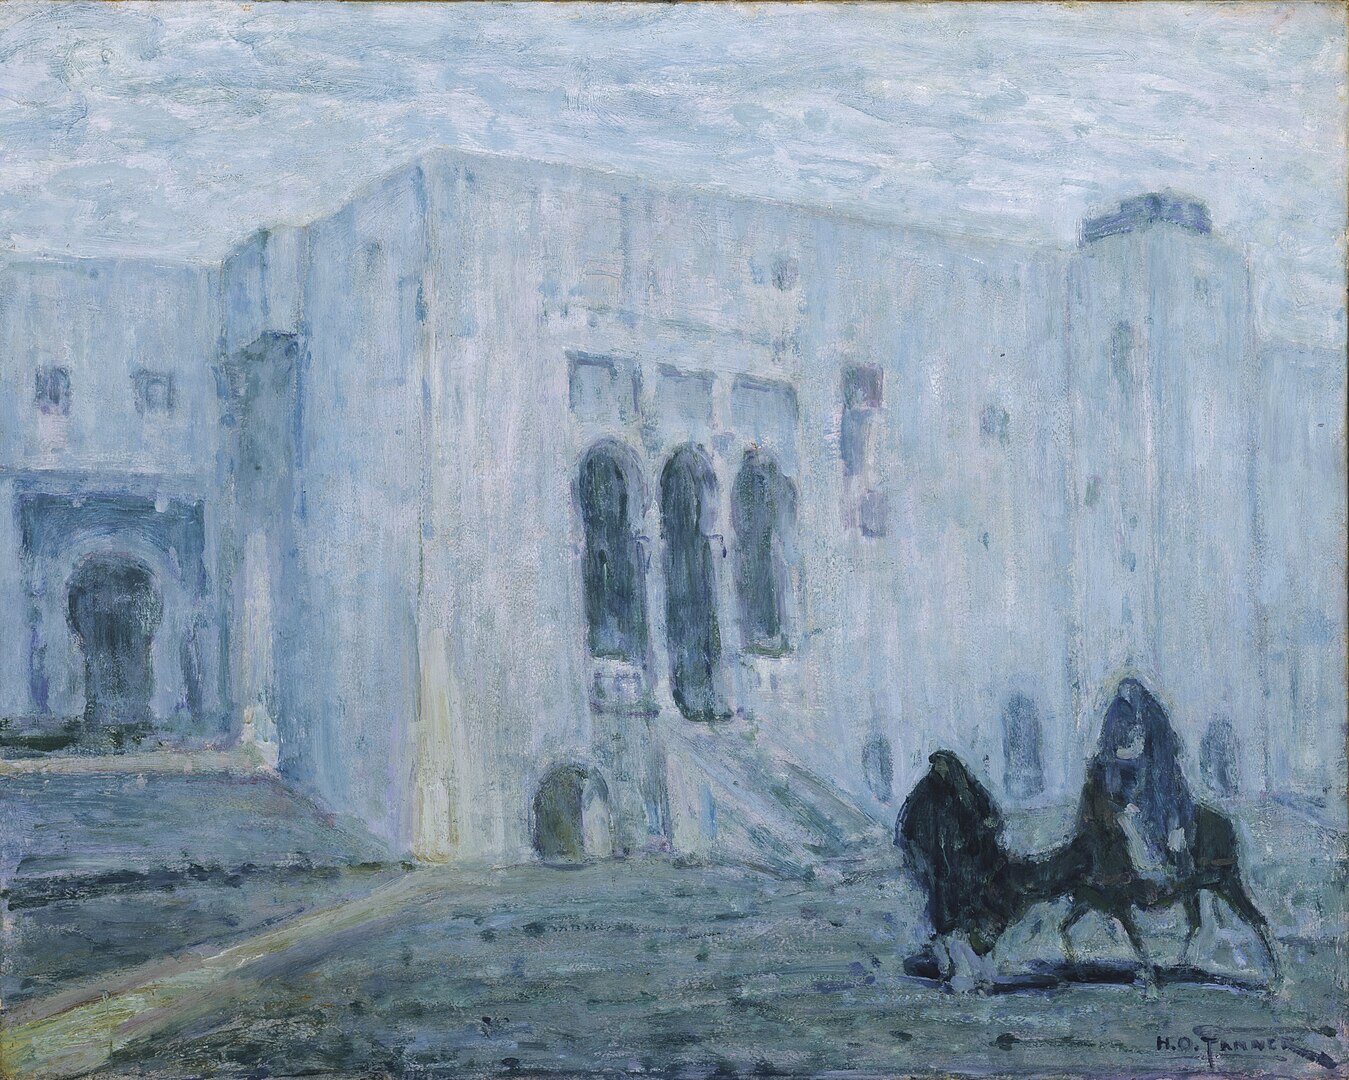 0899_Henry Ossawa Tanner_Palace of Justice, Tangier 썸네일